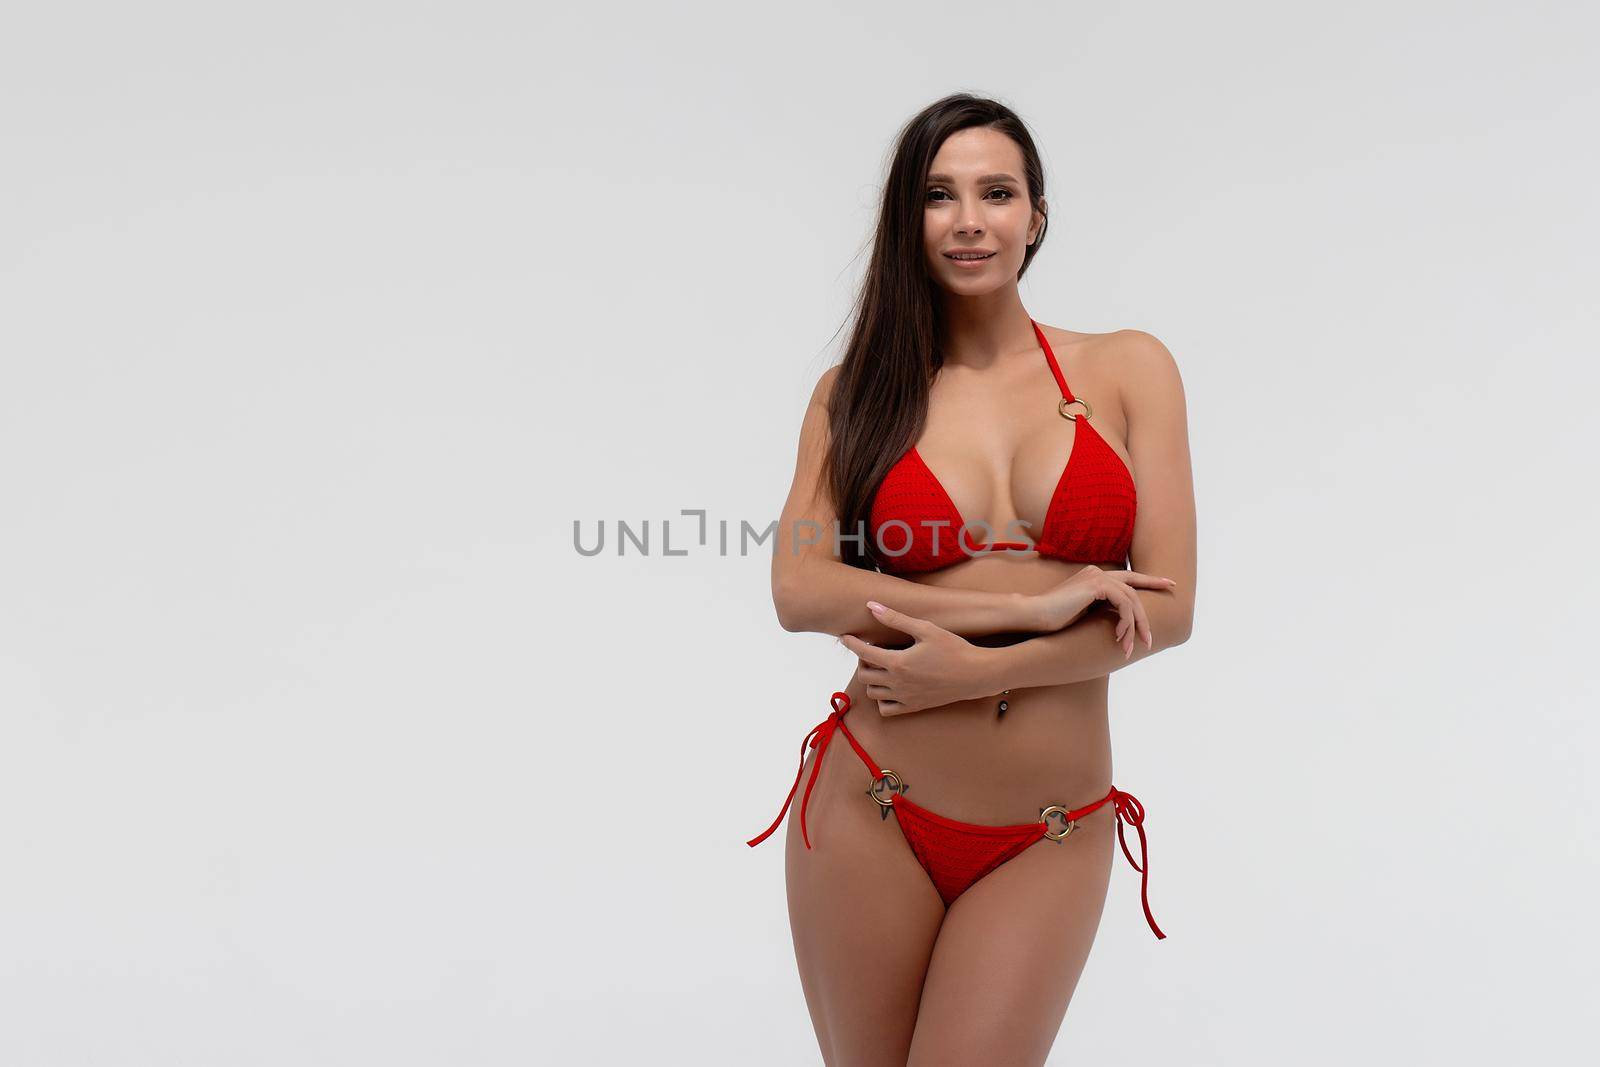 Seductive young long haired brunette with perfect tanned slim body wearing stylish red bikini looking at camera while standing against white background